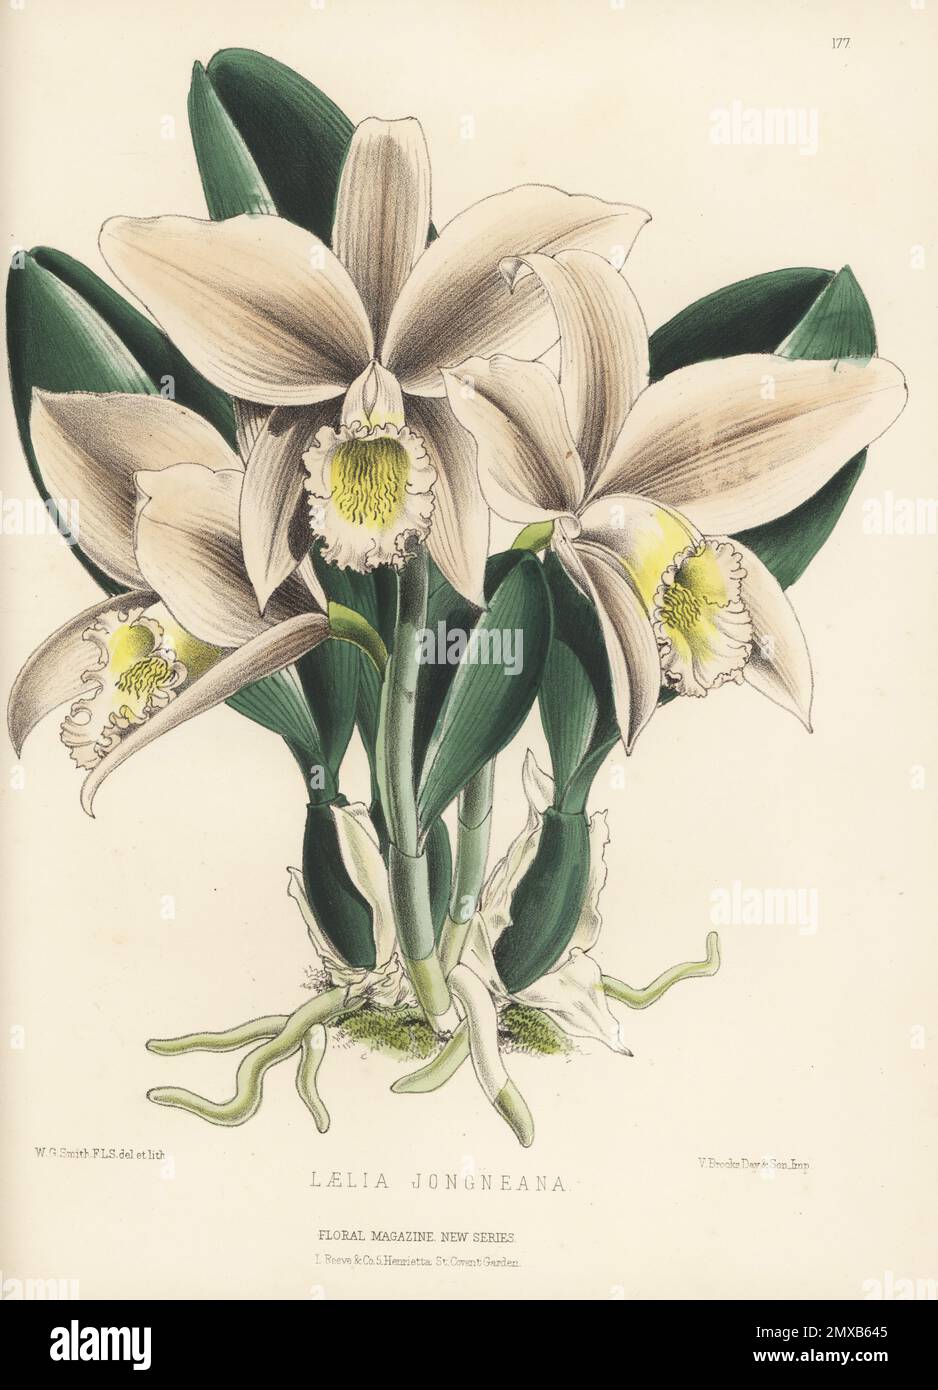 Jonghe's cattleya orchid, Cattleya jongheana, native to Brazil. Imported by Jean de Jonghe of Brussels, discovered by Libon. As Laelia jongheana, Laelia jongneana on plate. Handcolored botanical illustration drawn and lithographed by Worthington George Smith from Henry Honywood Dombrain's Floral Magazine, New Series, Volume 4, L. Reeve, London, 1875. Lithograph printed by Vincent Brooks, Day & Son. Stock Photo